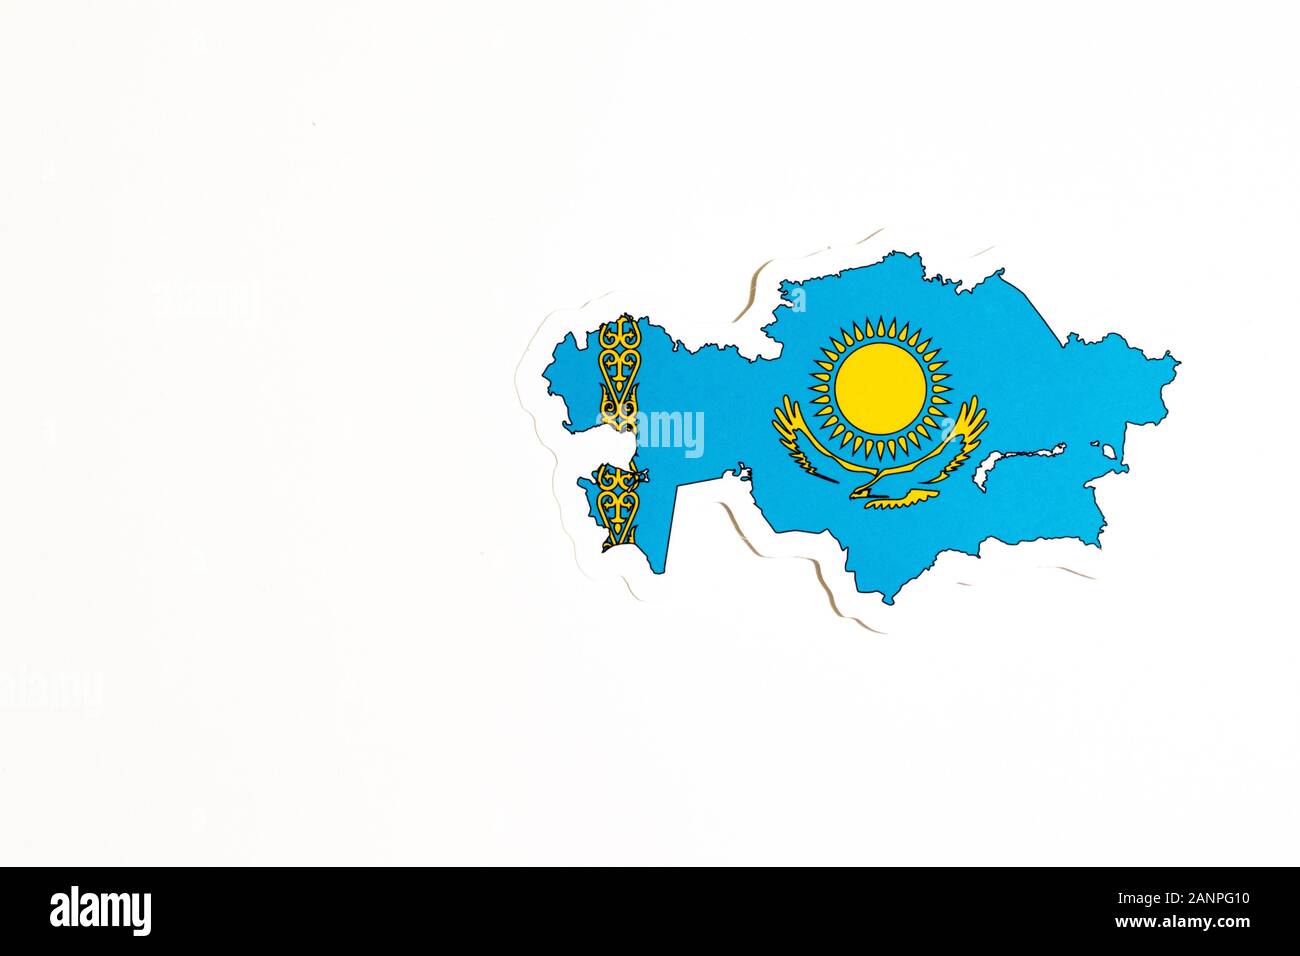 Los Angeles, California, USA - 17 January 2020: National flag of Kazakhstan. Country outline on white background with copy space. Politics Stock Photo